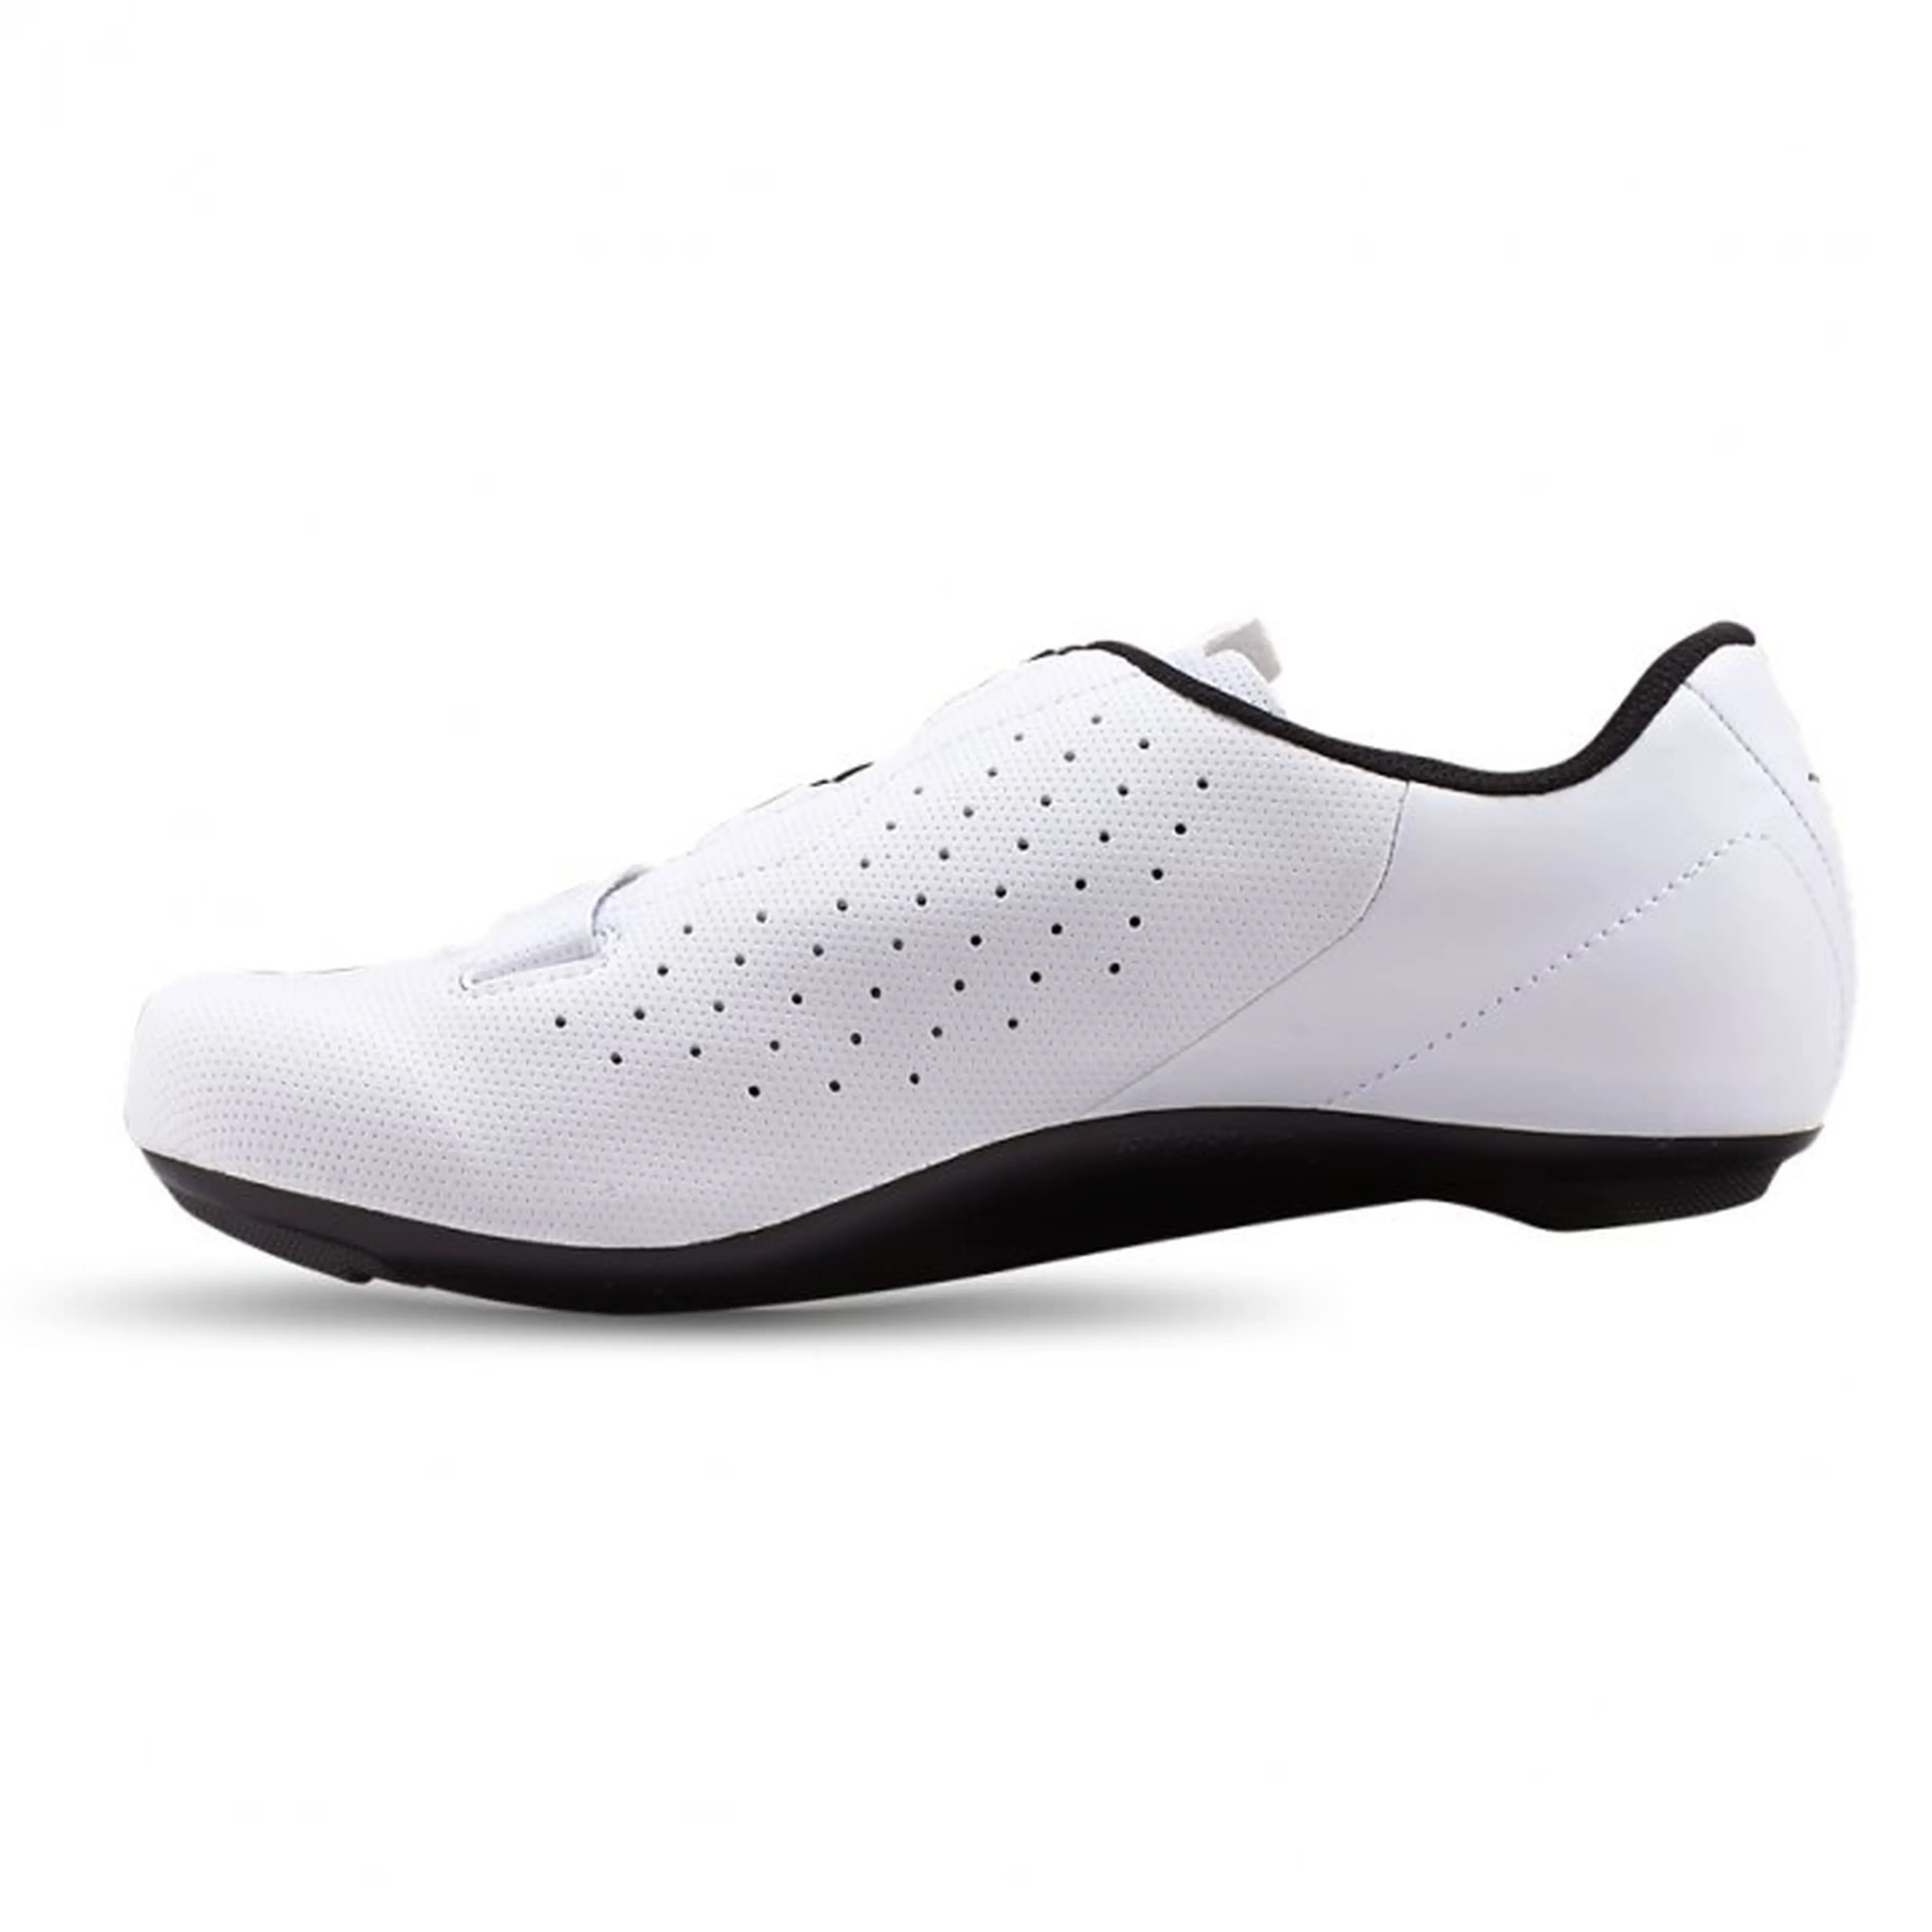 4. Pantofi ciclism Specialized Torch 1.0 Road